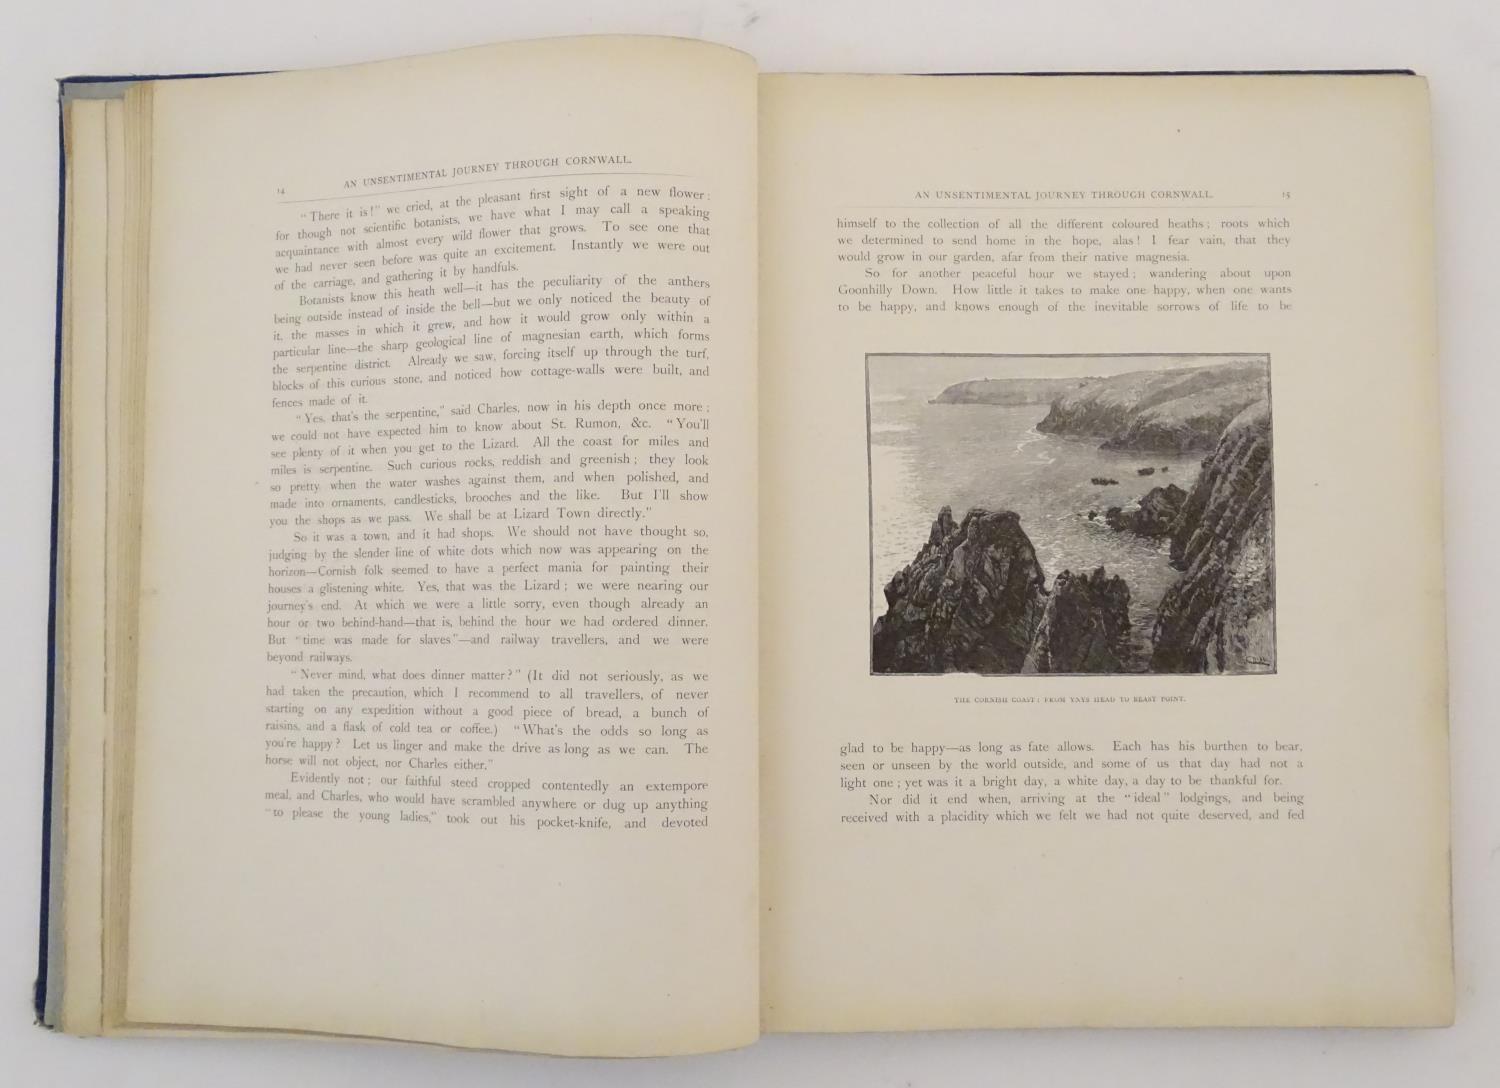 Book: An Unsentimental Journey through Cornwall, by Dinah Mulock Craik, illustrated by C. Napier - Image 4 of 7